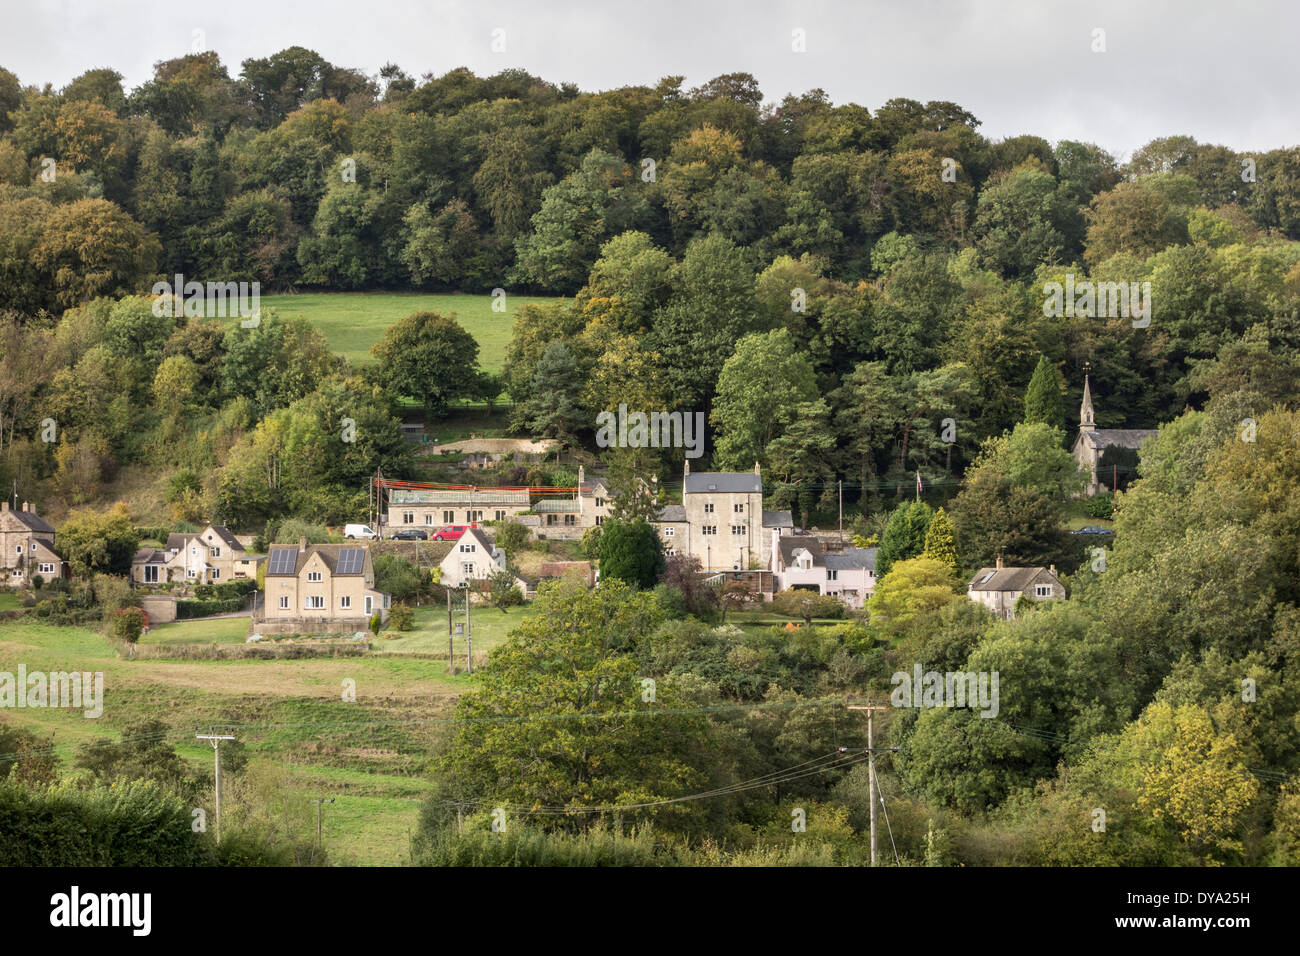 View over Slad Valley, near Stroud, Gloucestershire, UK Stock Photo